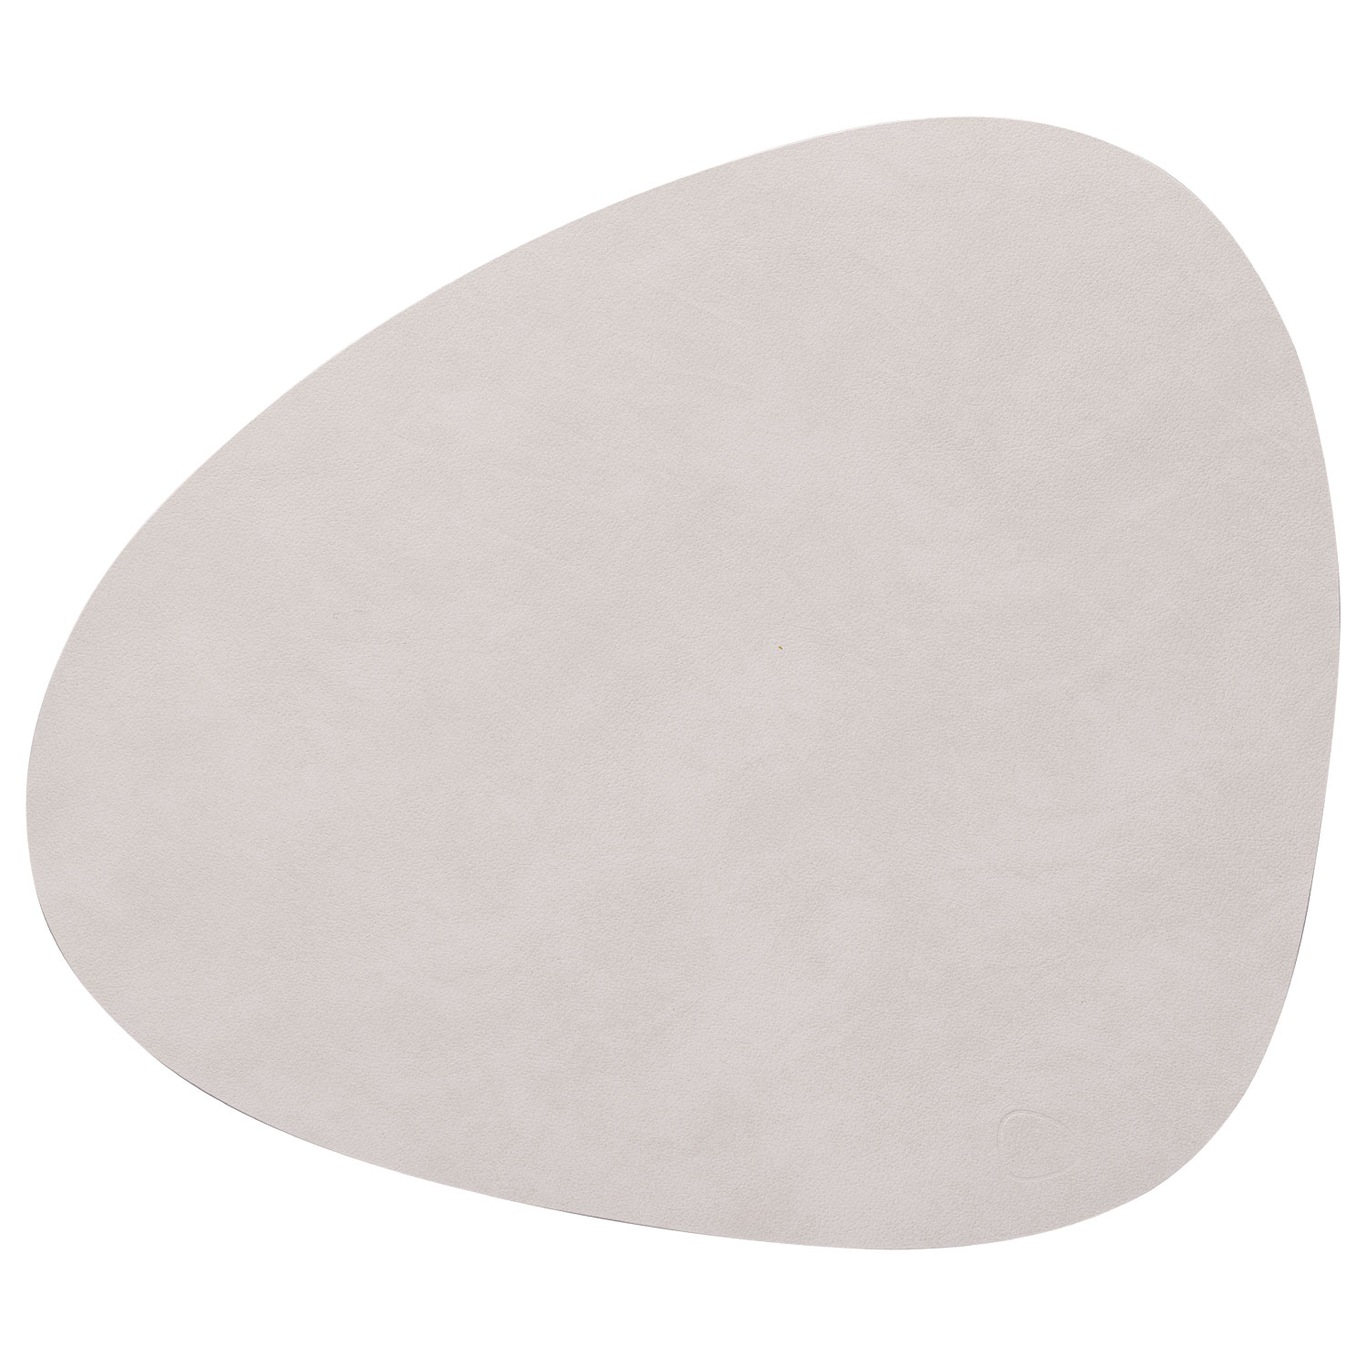 Curve L Table Mat Nupo 37x44 cm, Oyster White